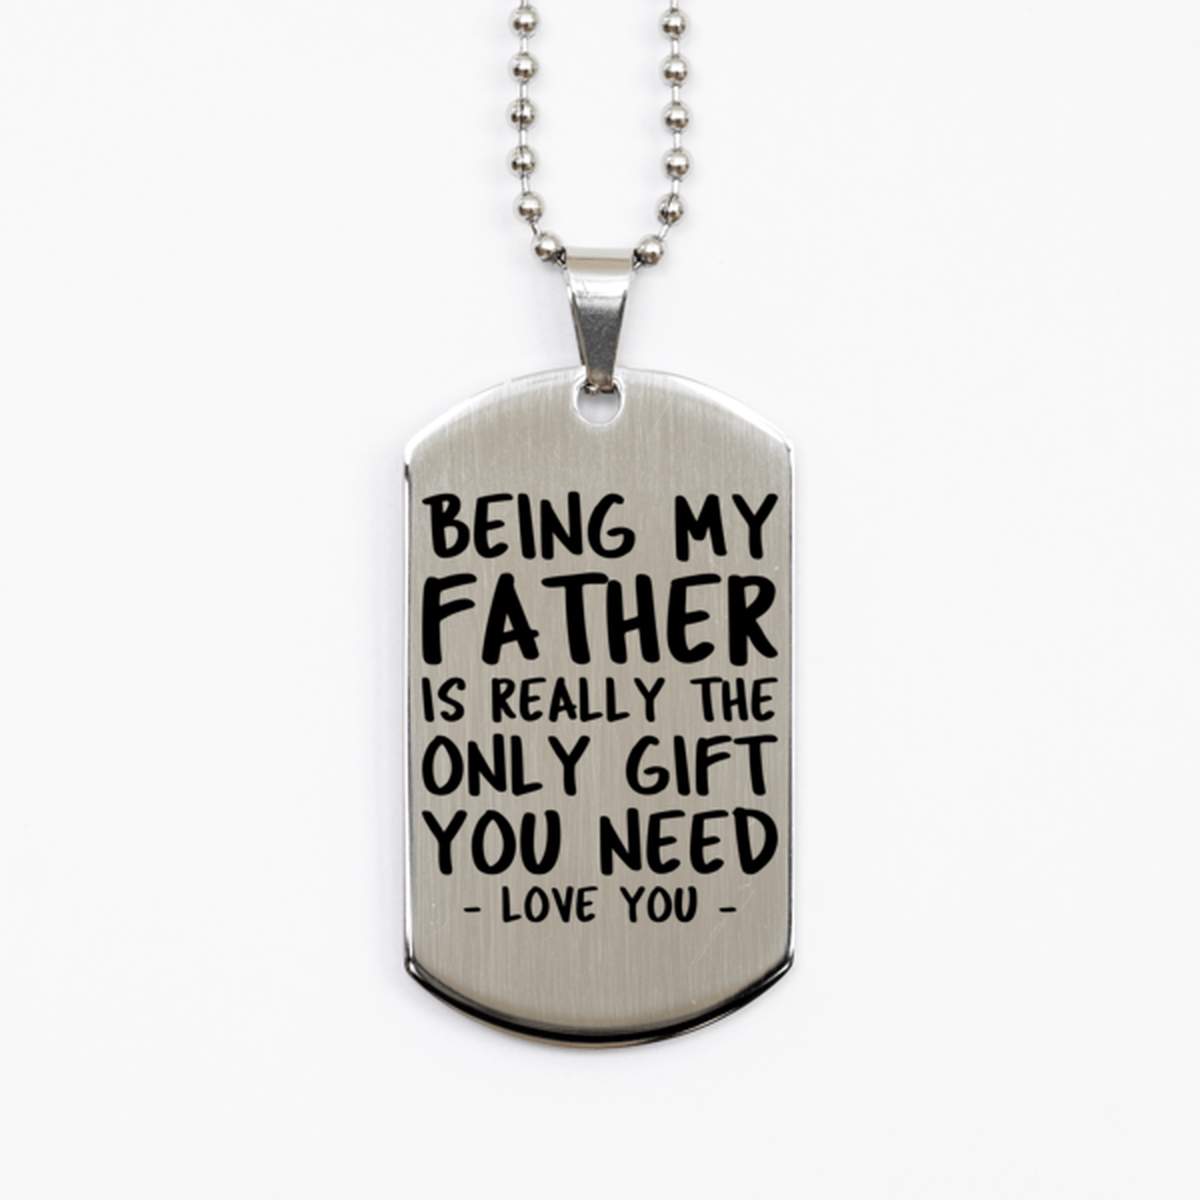 Funny Father Silver Dog Tag Necklace, Being My Father Is Really the Only Gift You Need, Best Birthday Gifts for Father